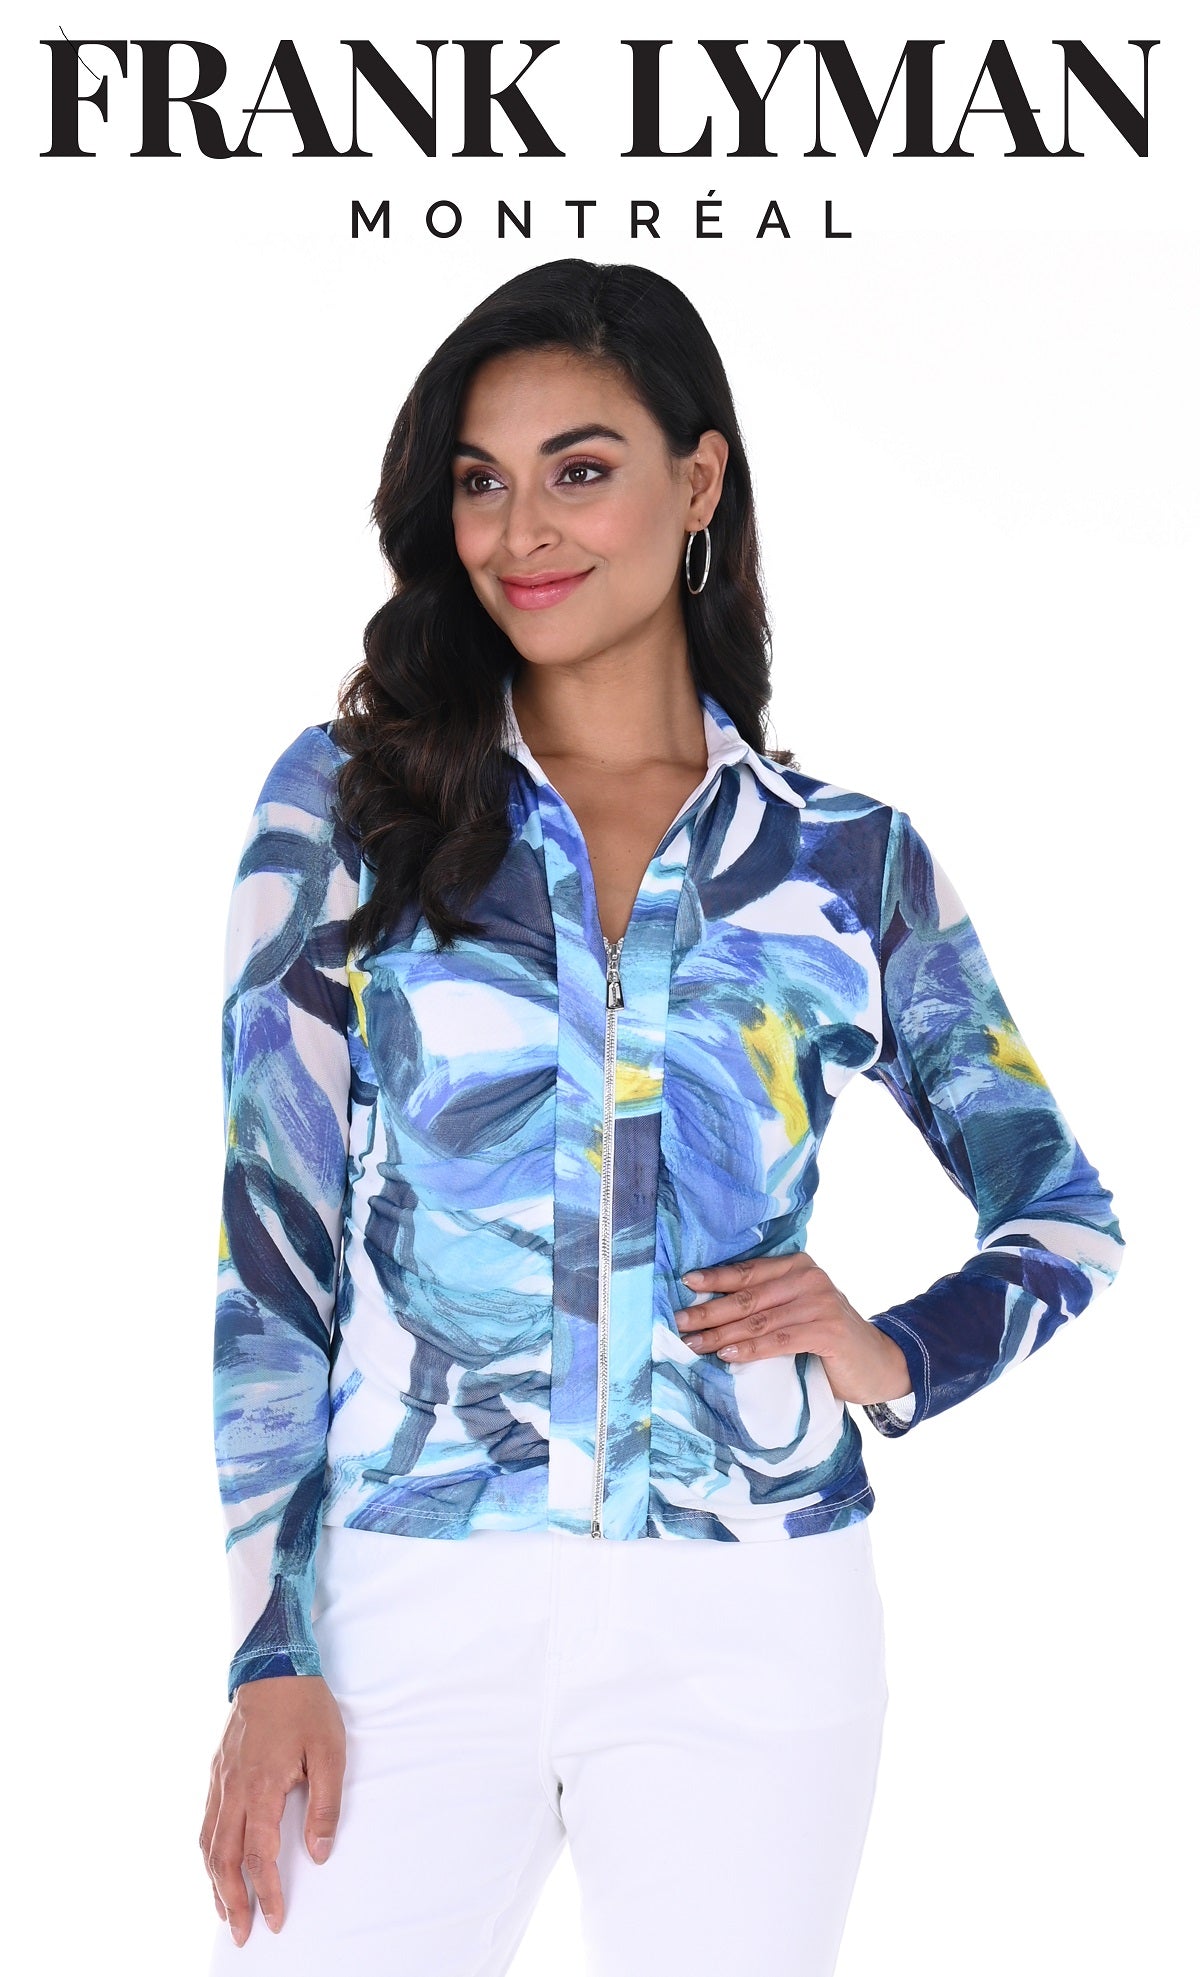 Frank Lyman Montreal Royal-White printed jacket with sheer arms and zipper front.